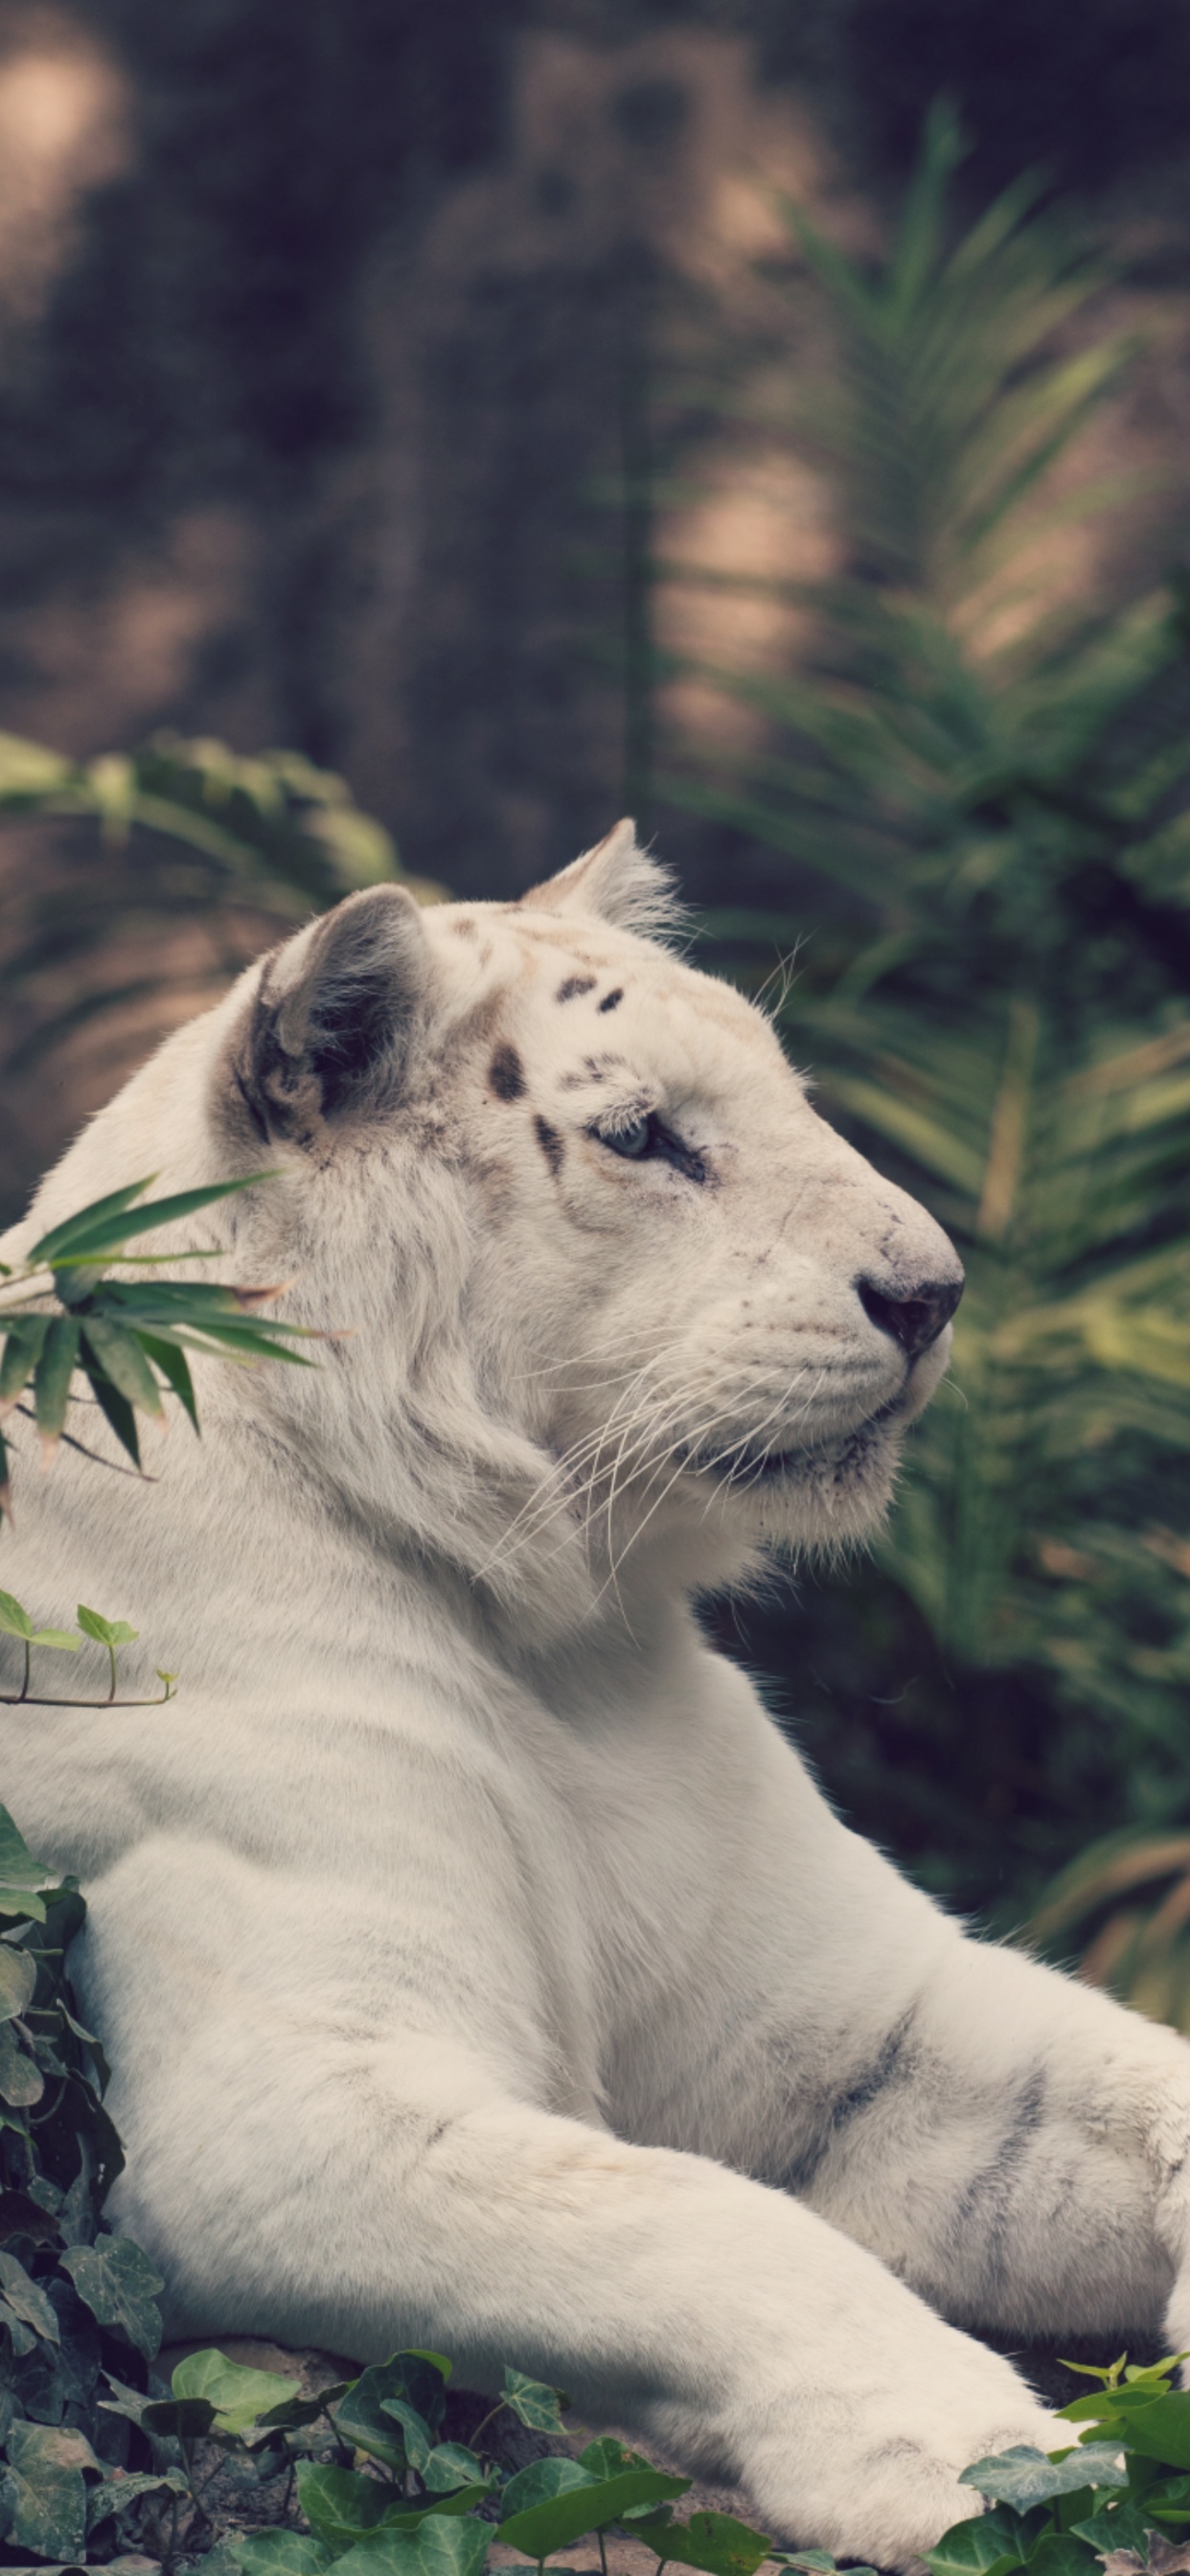 White Tiger Lying on Ground. Wallpaper in 1242x2688 Resolution